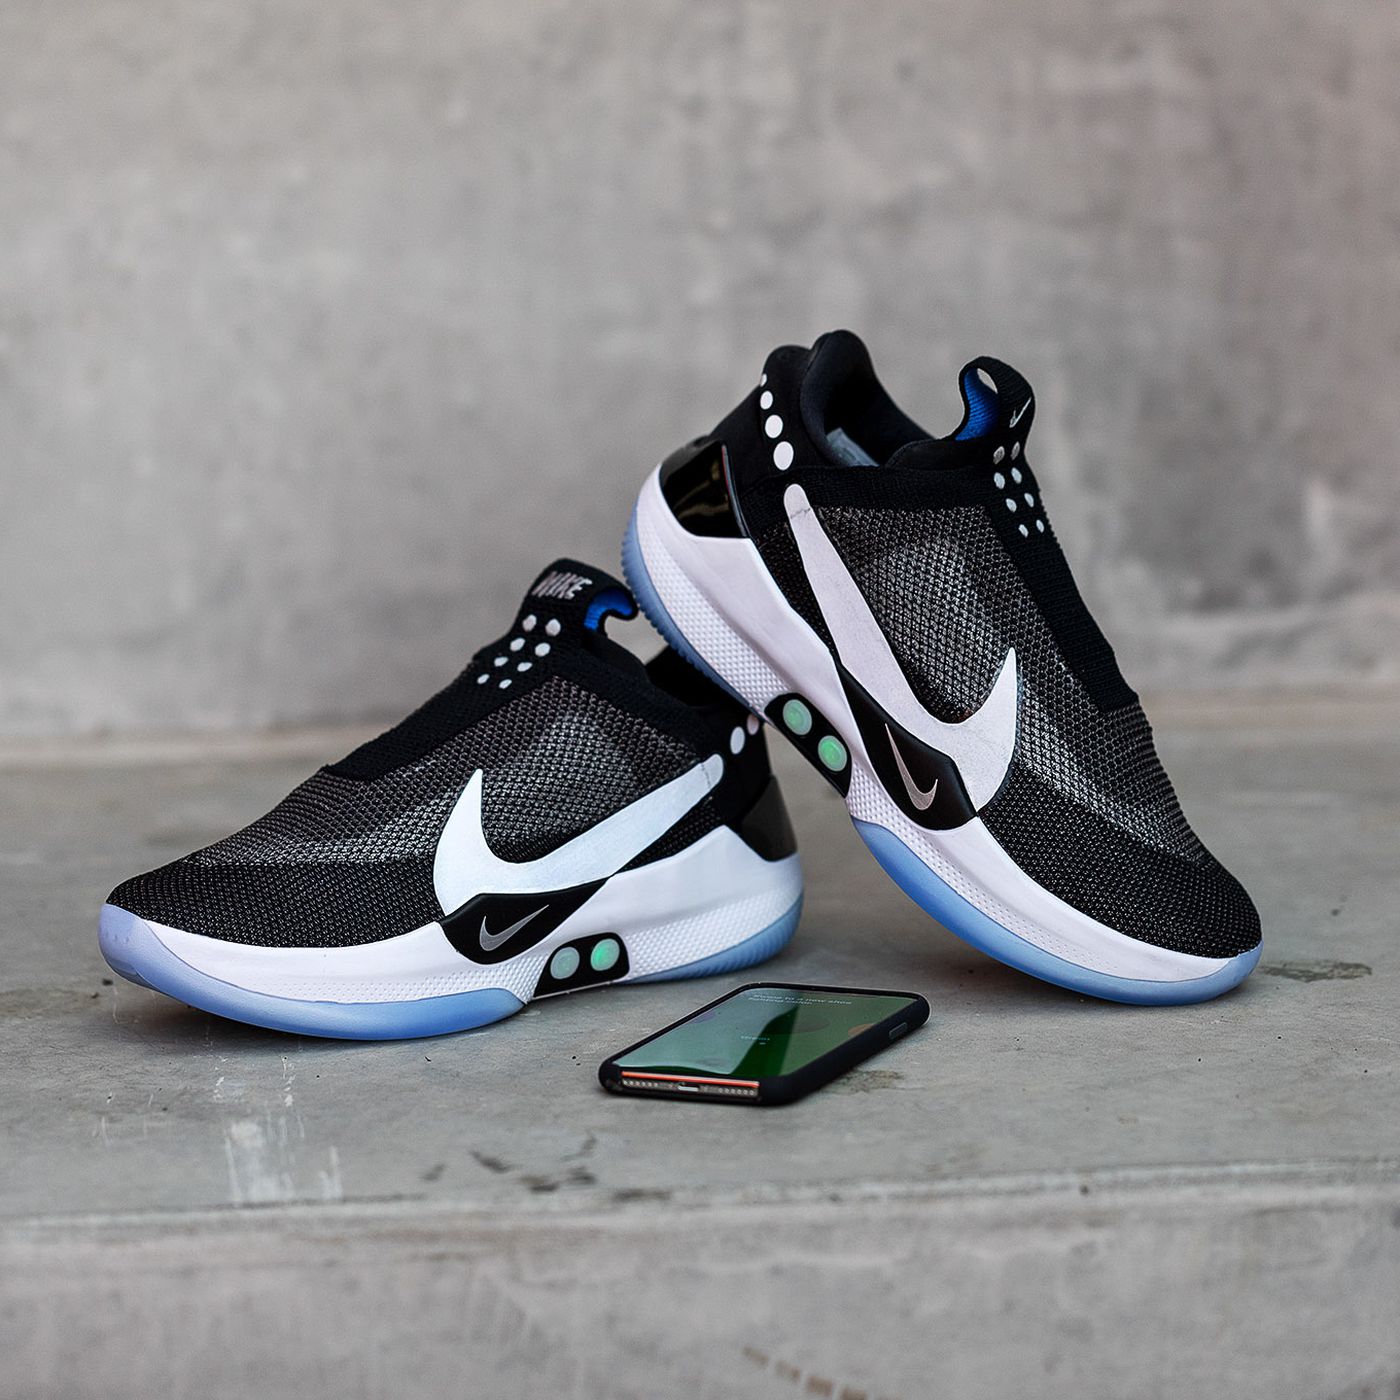 Nike's Adapt sneakers let tie your shoes from an app - The Verge